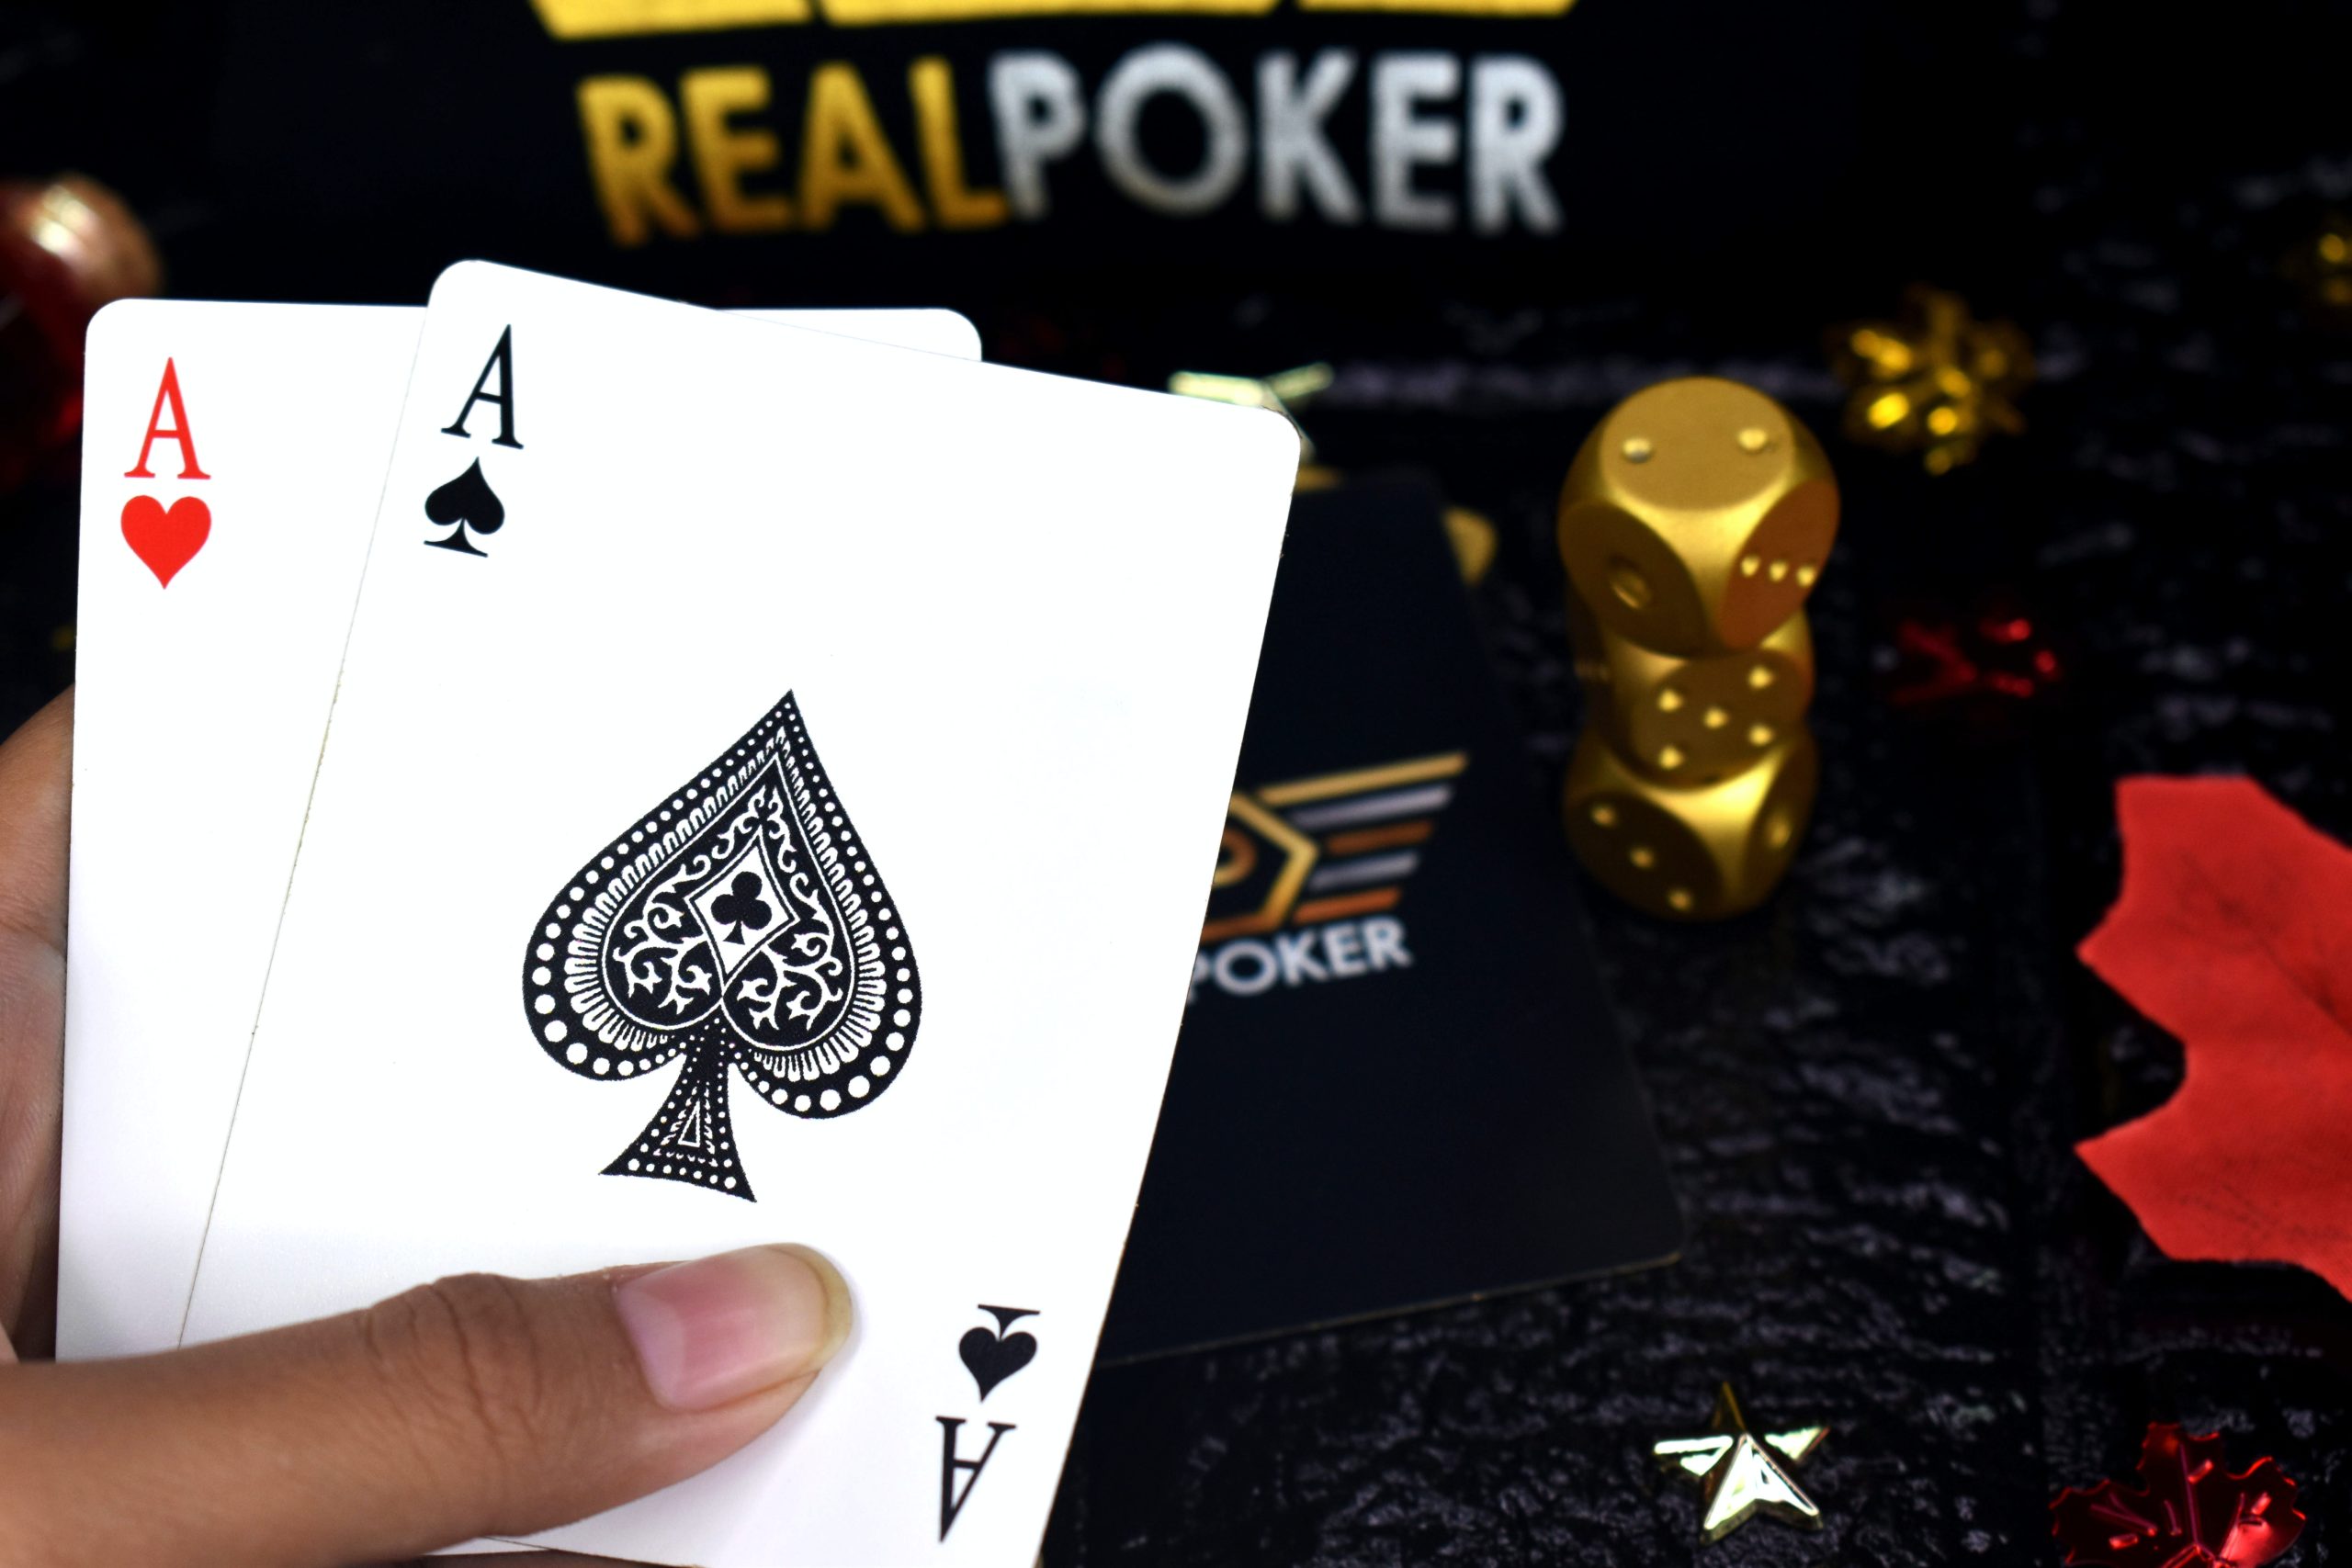 Online poker: Between ruin and quick riches